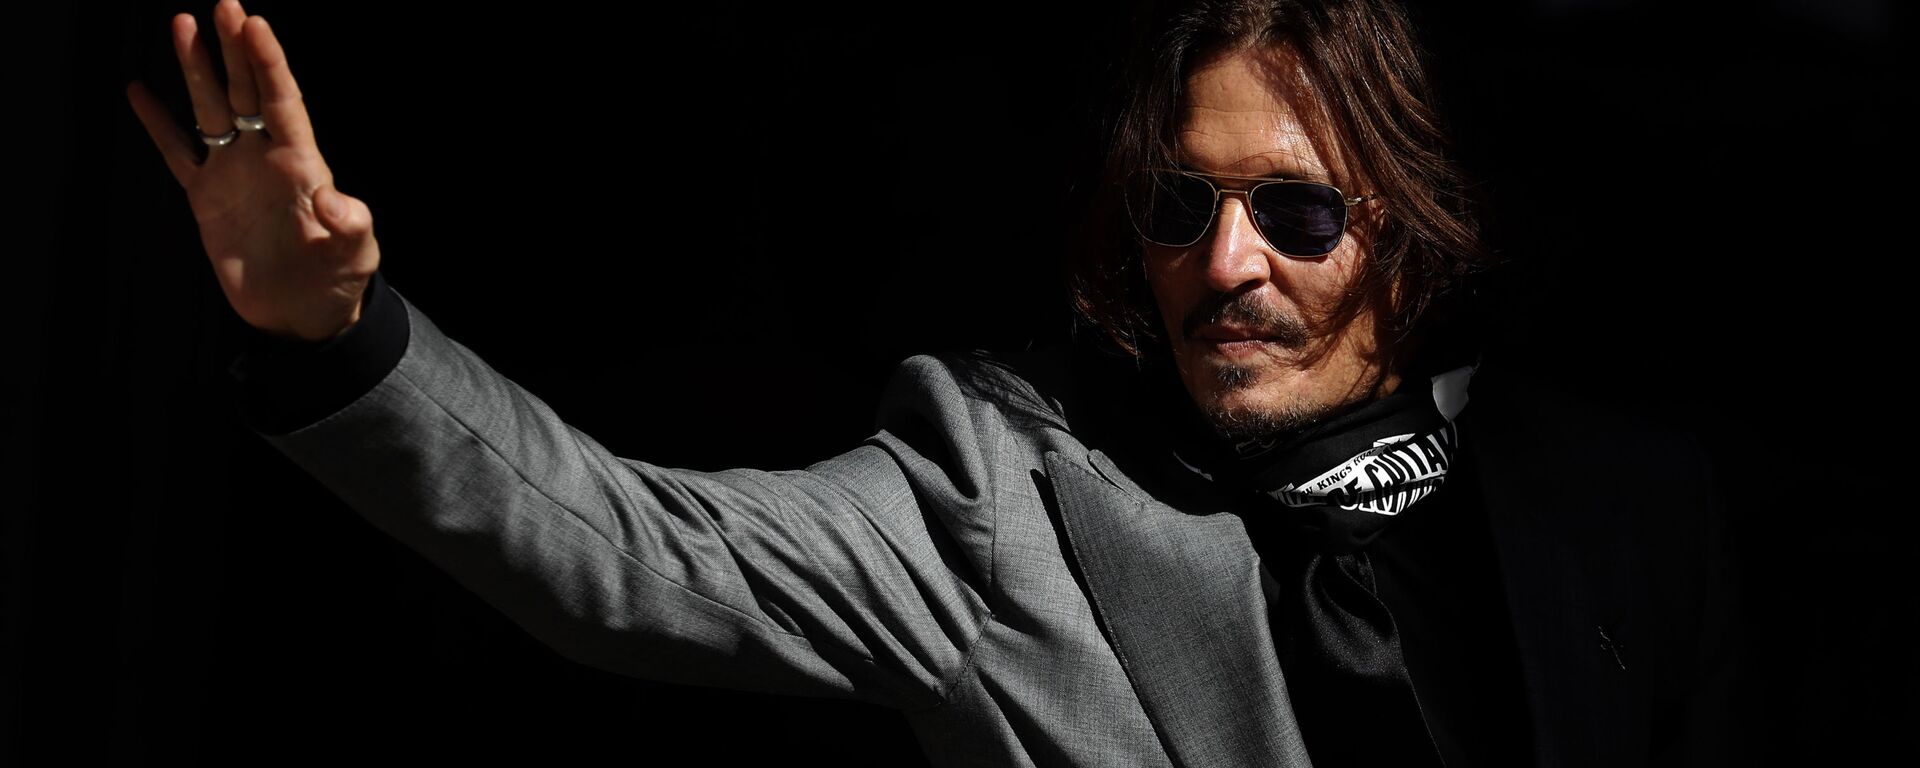 US actor Johnny Depp arrives at the High Court in London in London, Tuesday, July 28, 2020.  Hollywood actor Johnny Depp is suing News Group Newspapers over a story about his former wife Amber Heard, published in The Sun in 2018 which branded him a 'wife beater', a claim he denies. - Sputnik International, 1920, 23.09.2021